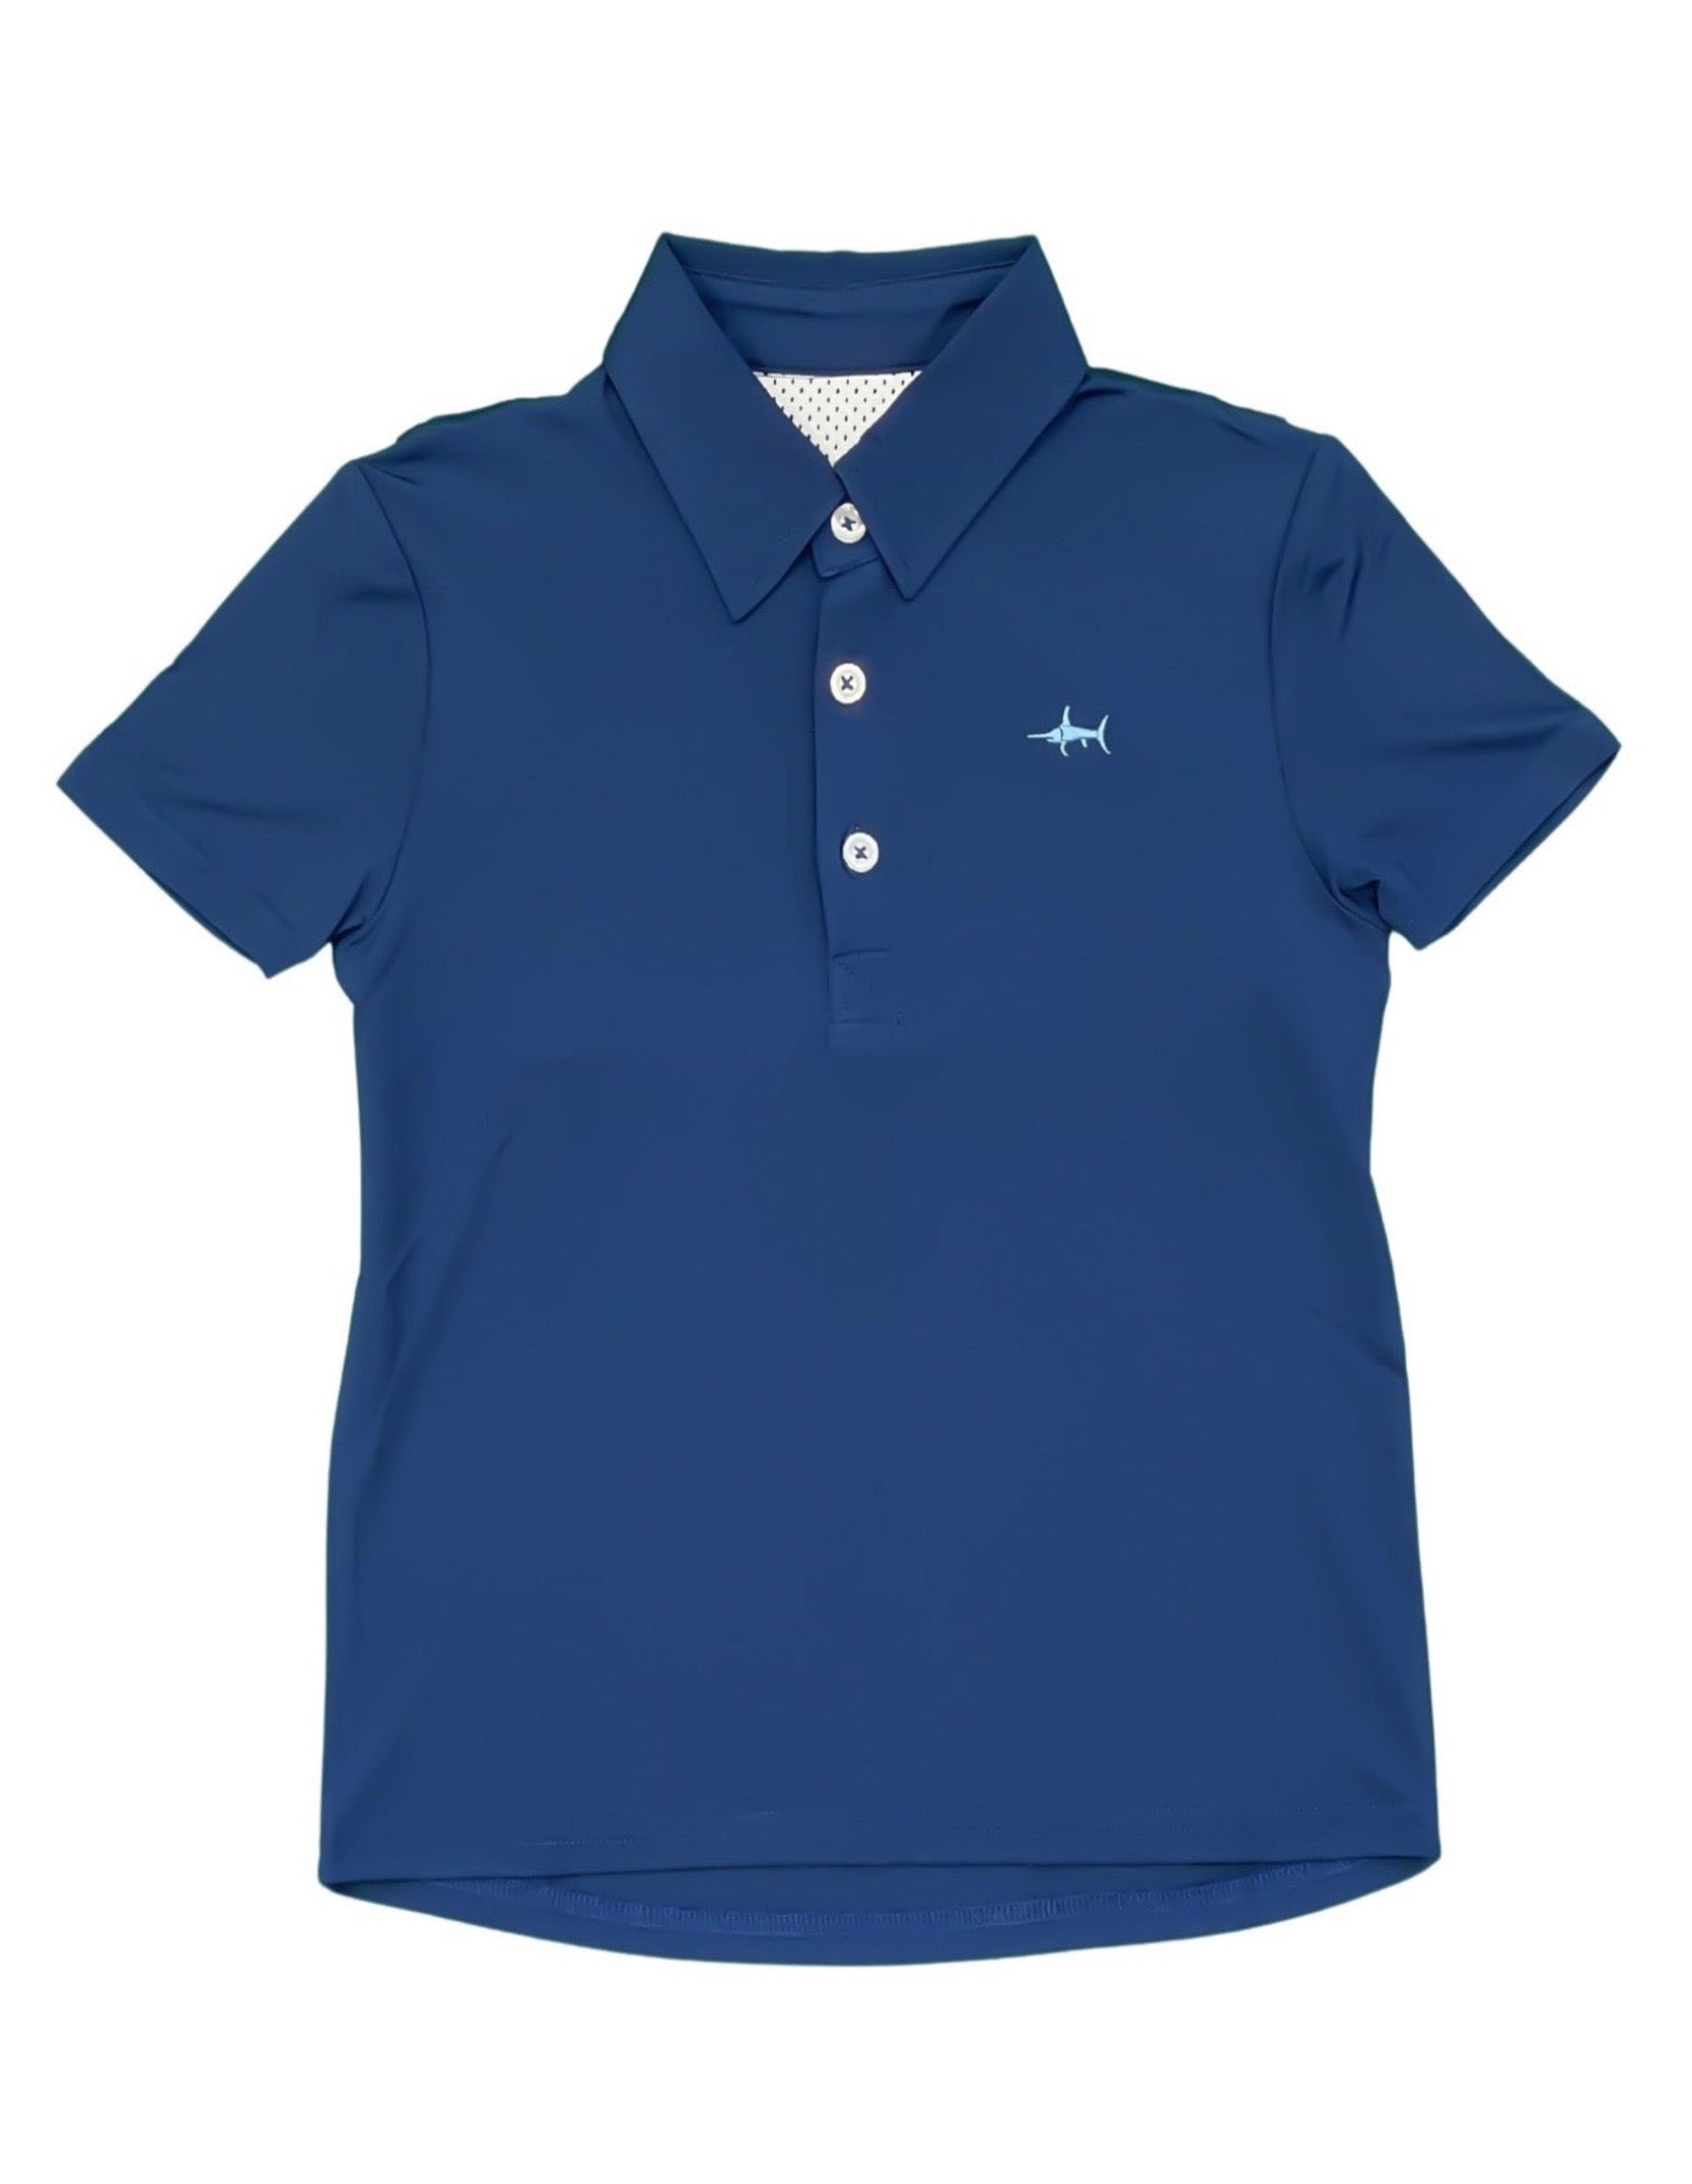 Offshore Performance Polo Navy